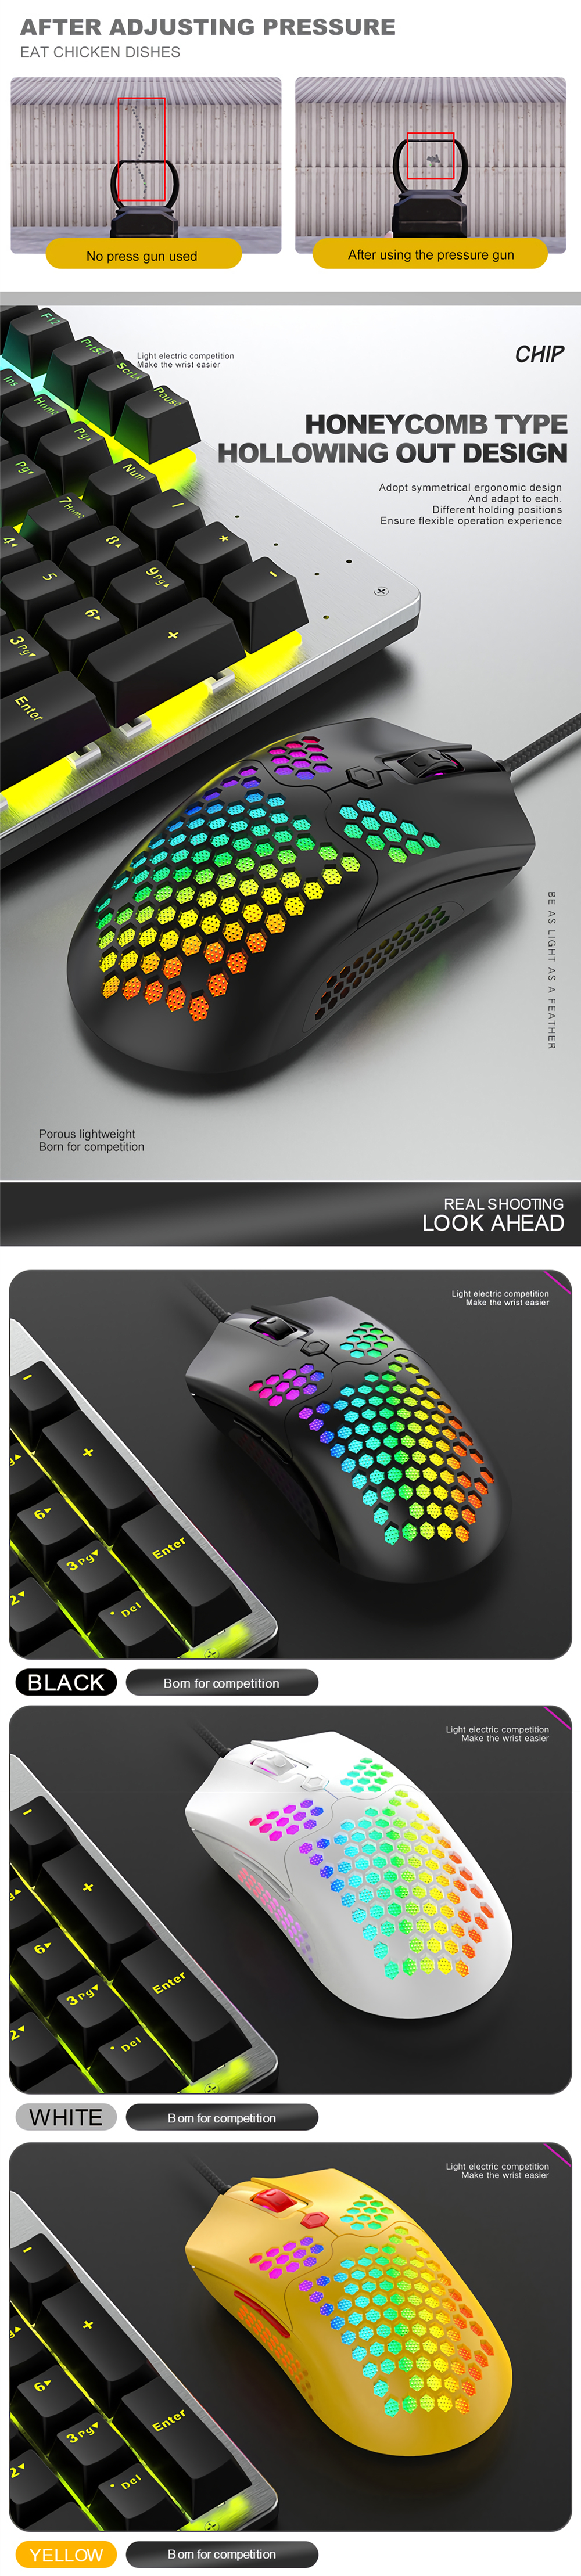 Free-wolf M5 Wired Game Mouse Breathing RGB Colorful Hollow Honeycomb Shape 12000DPI Gaming Mouse USB Wired Gamer Mice for Desktop Computer Laptop PC 3